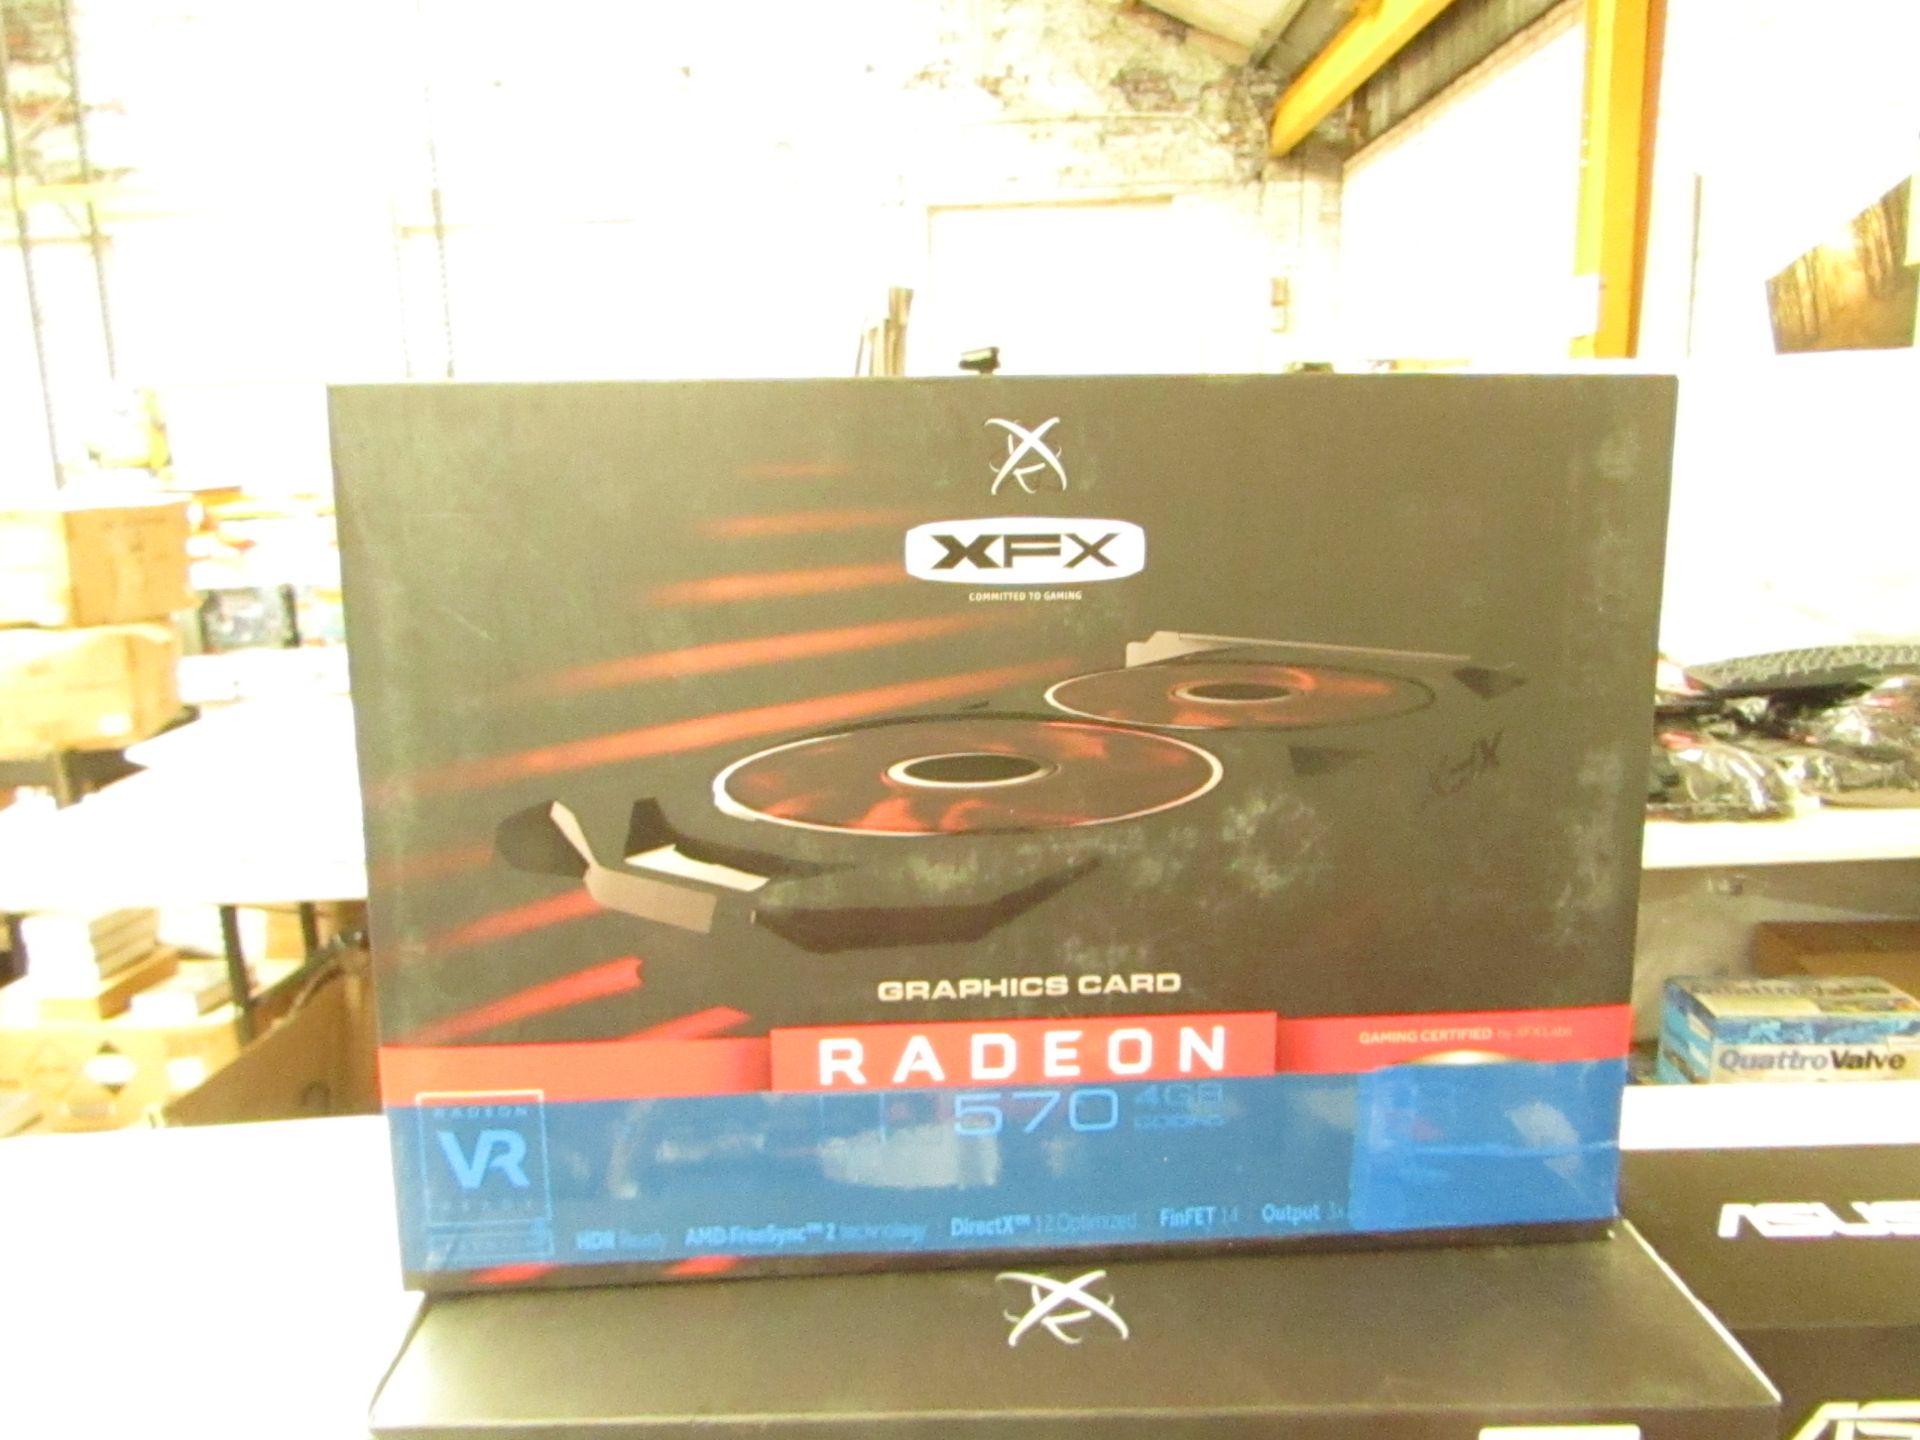 XFX Radeon 570 4GB graphics card, untested and boxed.